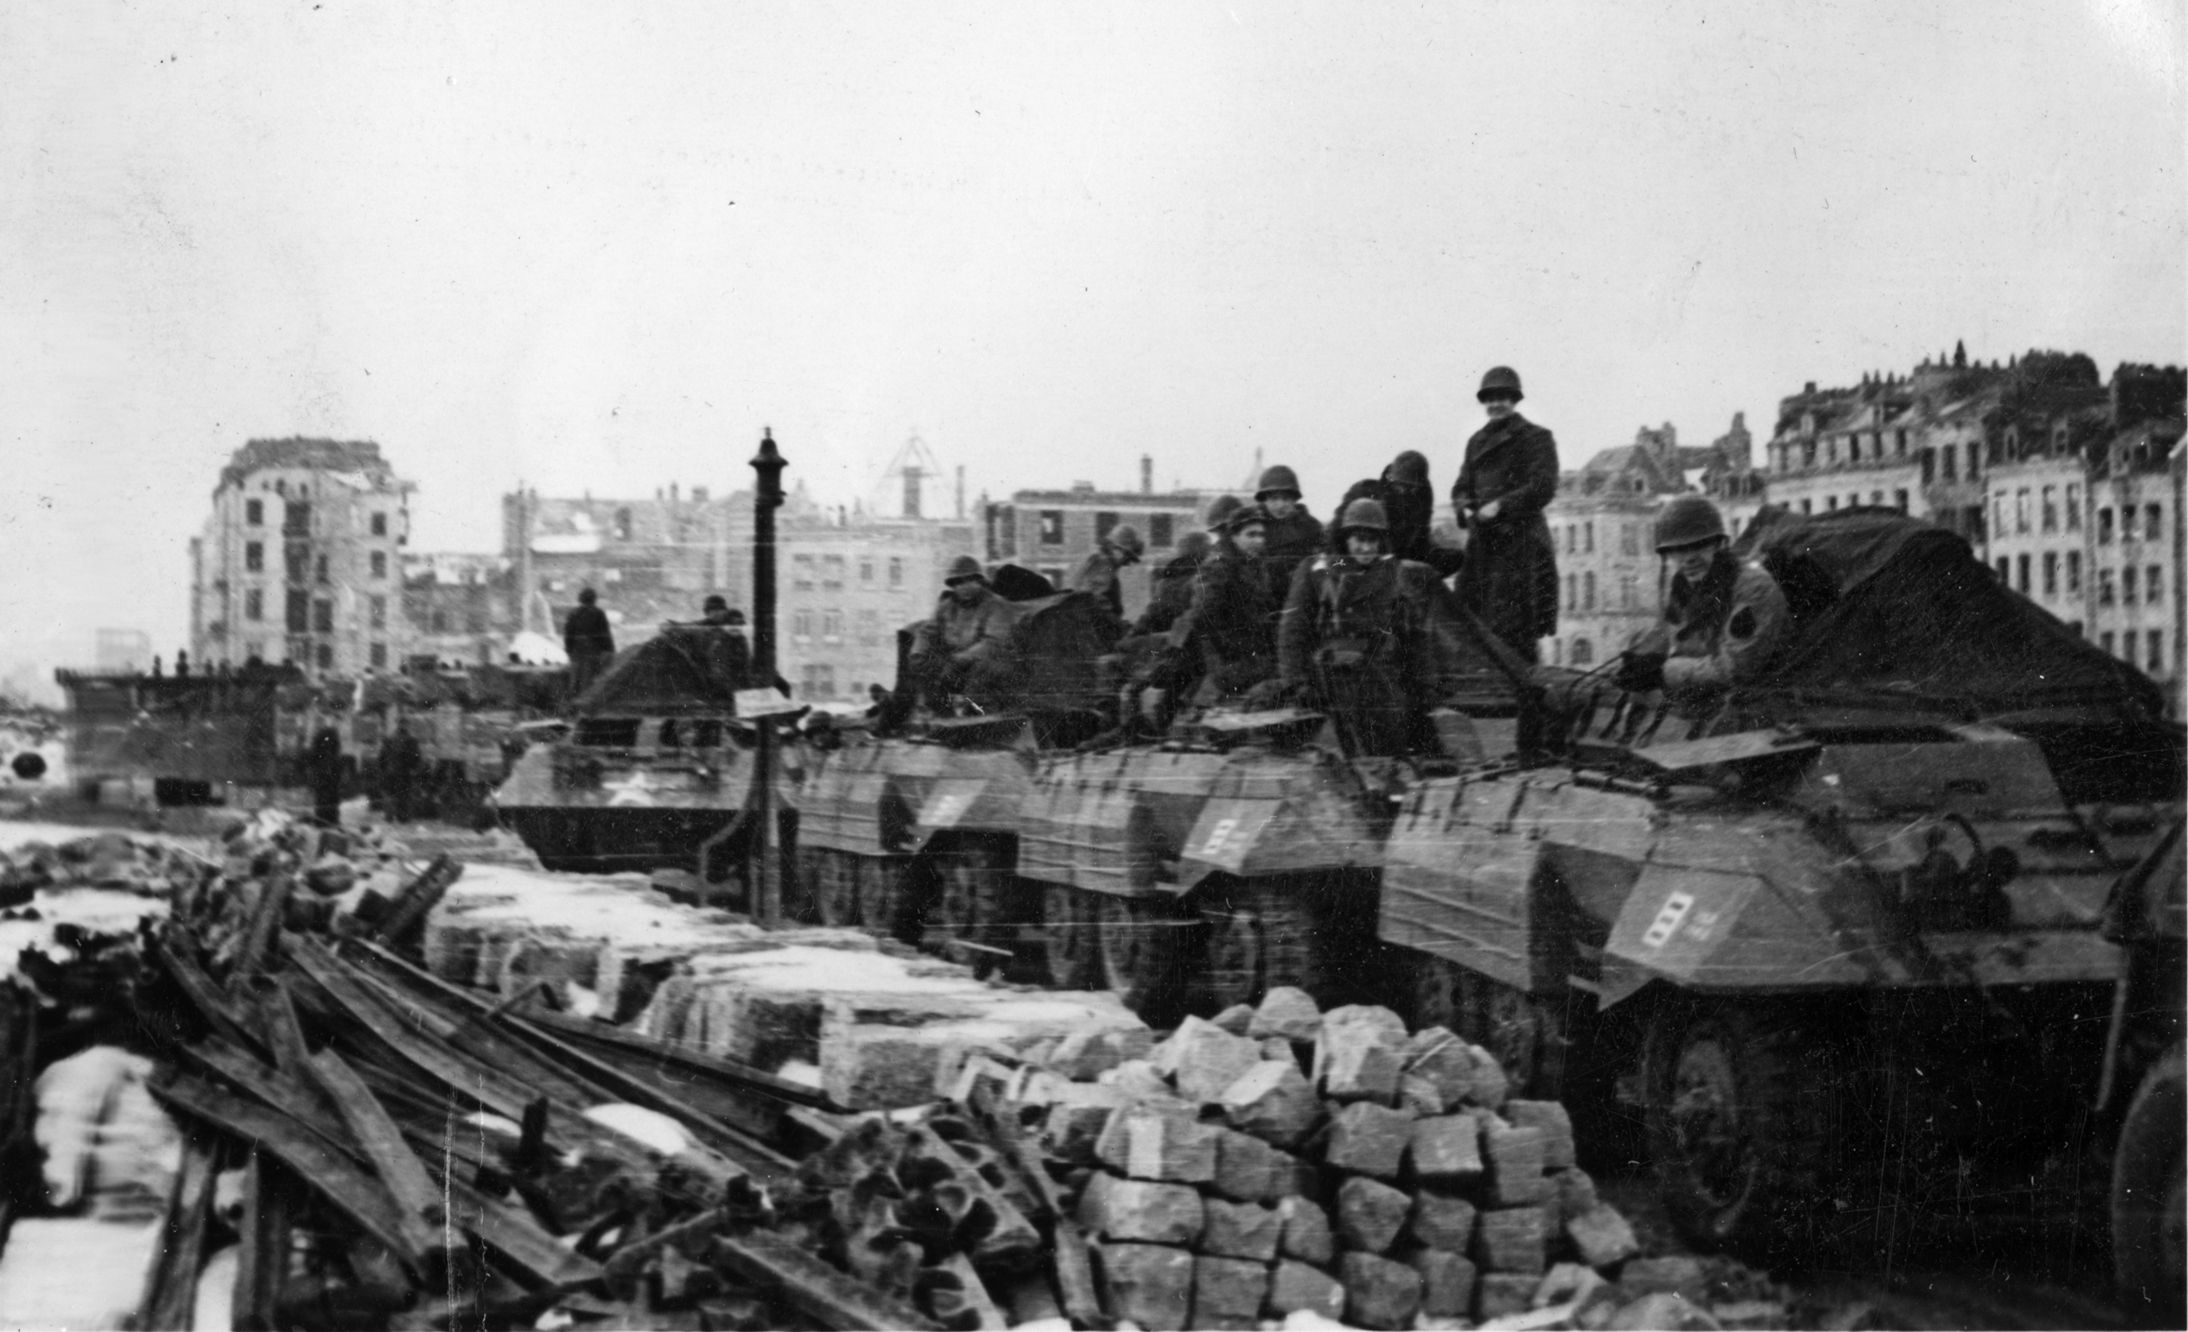 The 809th Tank Destroyer Battalion prepares to move out from the French port of Le Havre on January 22, 1945. The equipment consists of M20 command and reconnaissance cars belonging to the 809th’s A Company. The M20 was a variant of the M8 Greyhound, with the turret and 37mm cannon removed.